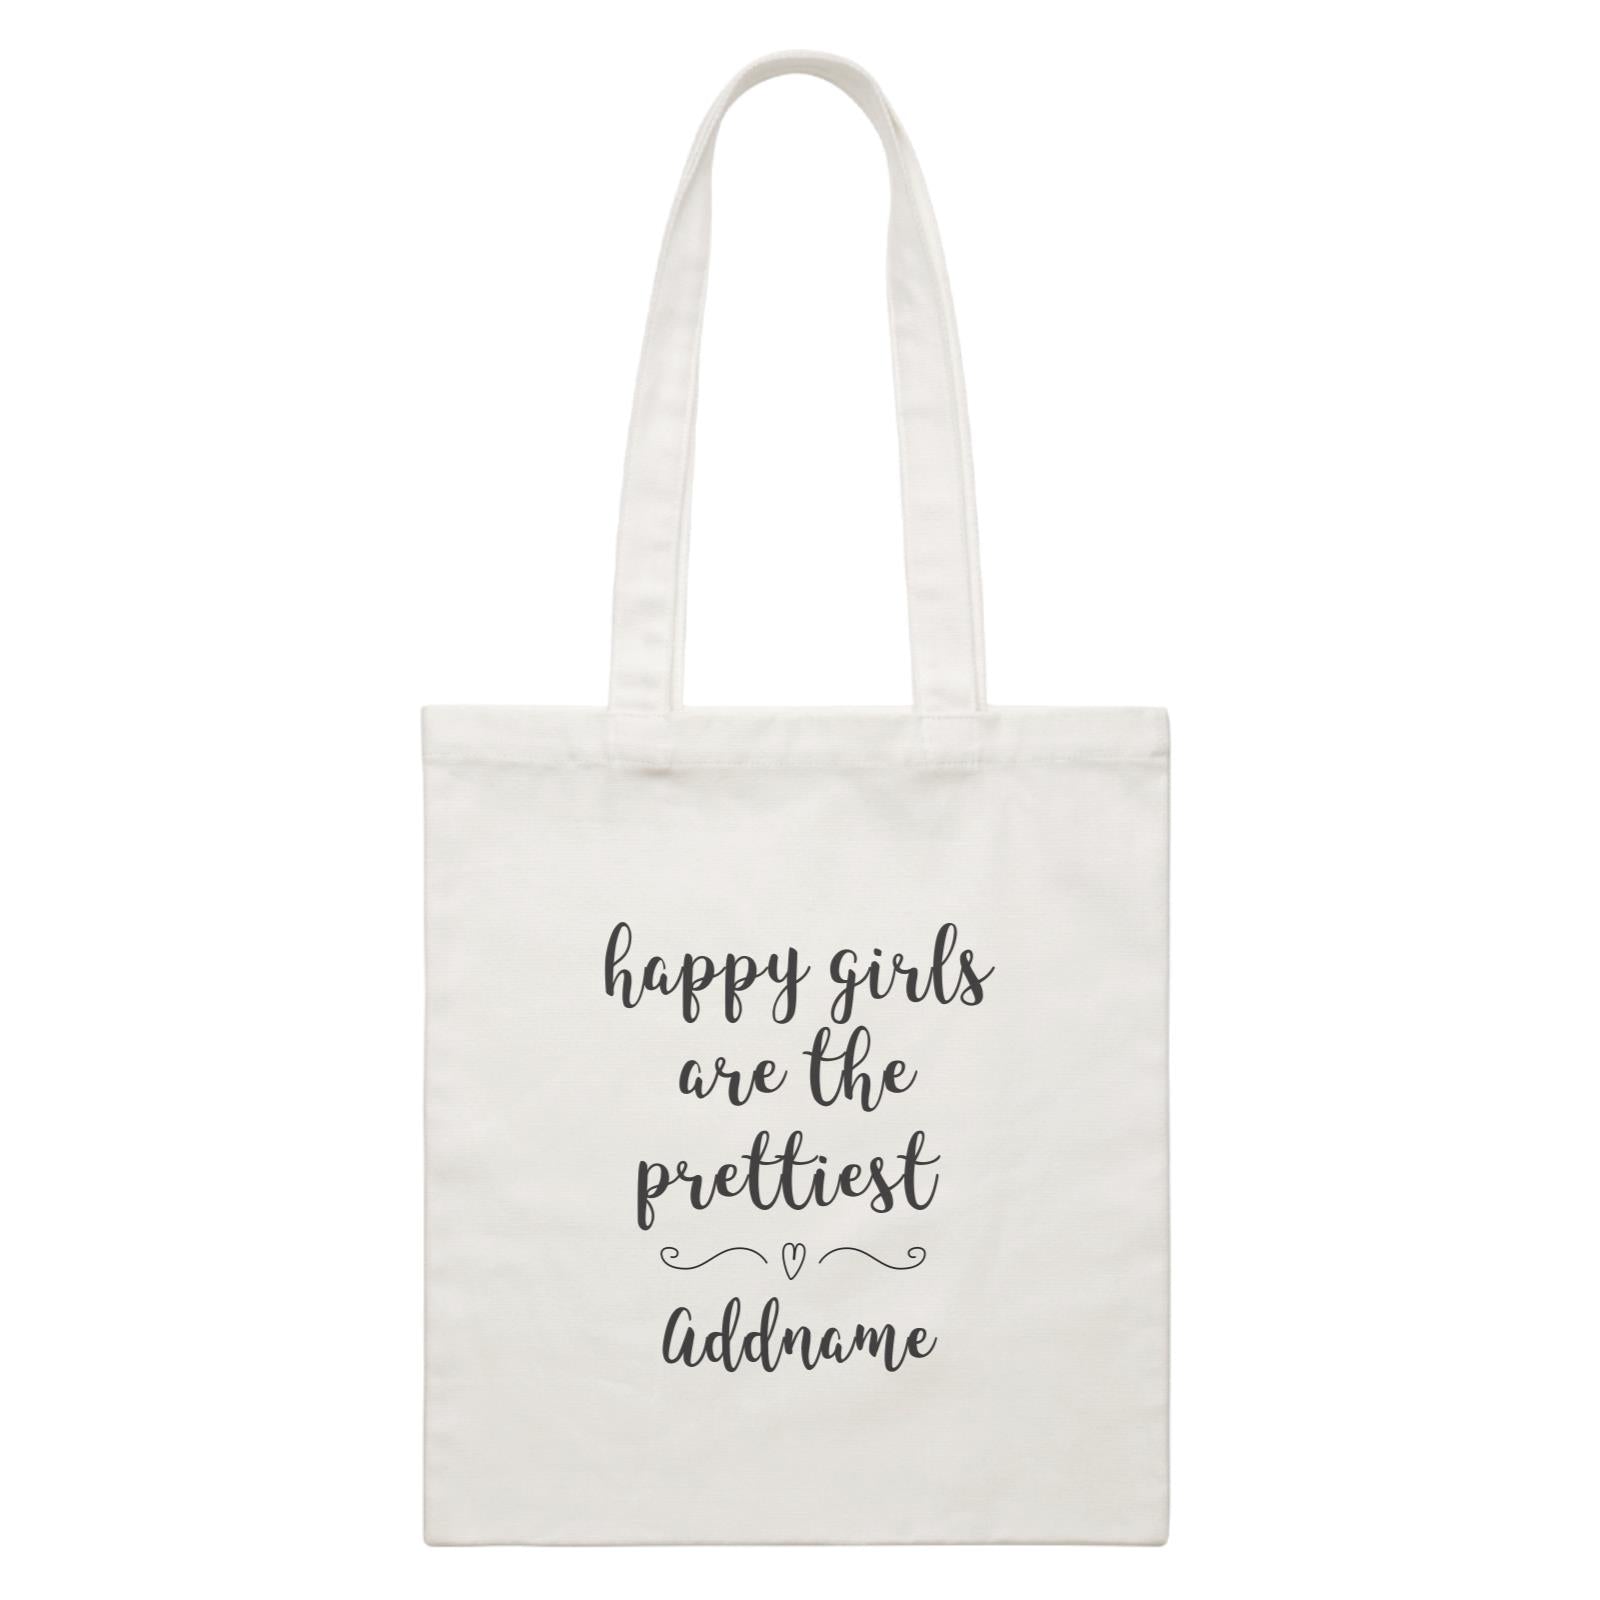 Make Up Quotes Happy Girls Are The Prettiest Addname White Canvas Bag